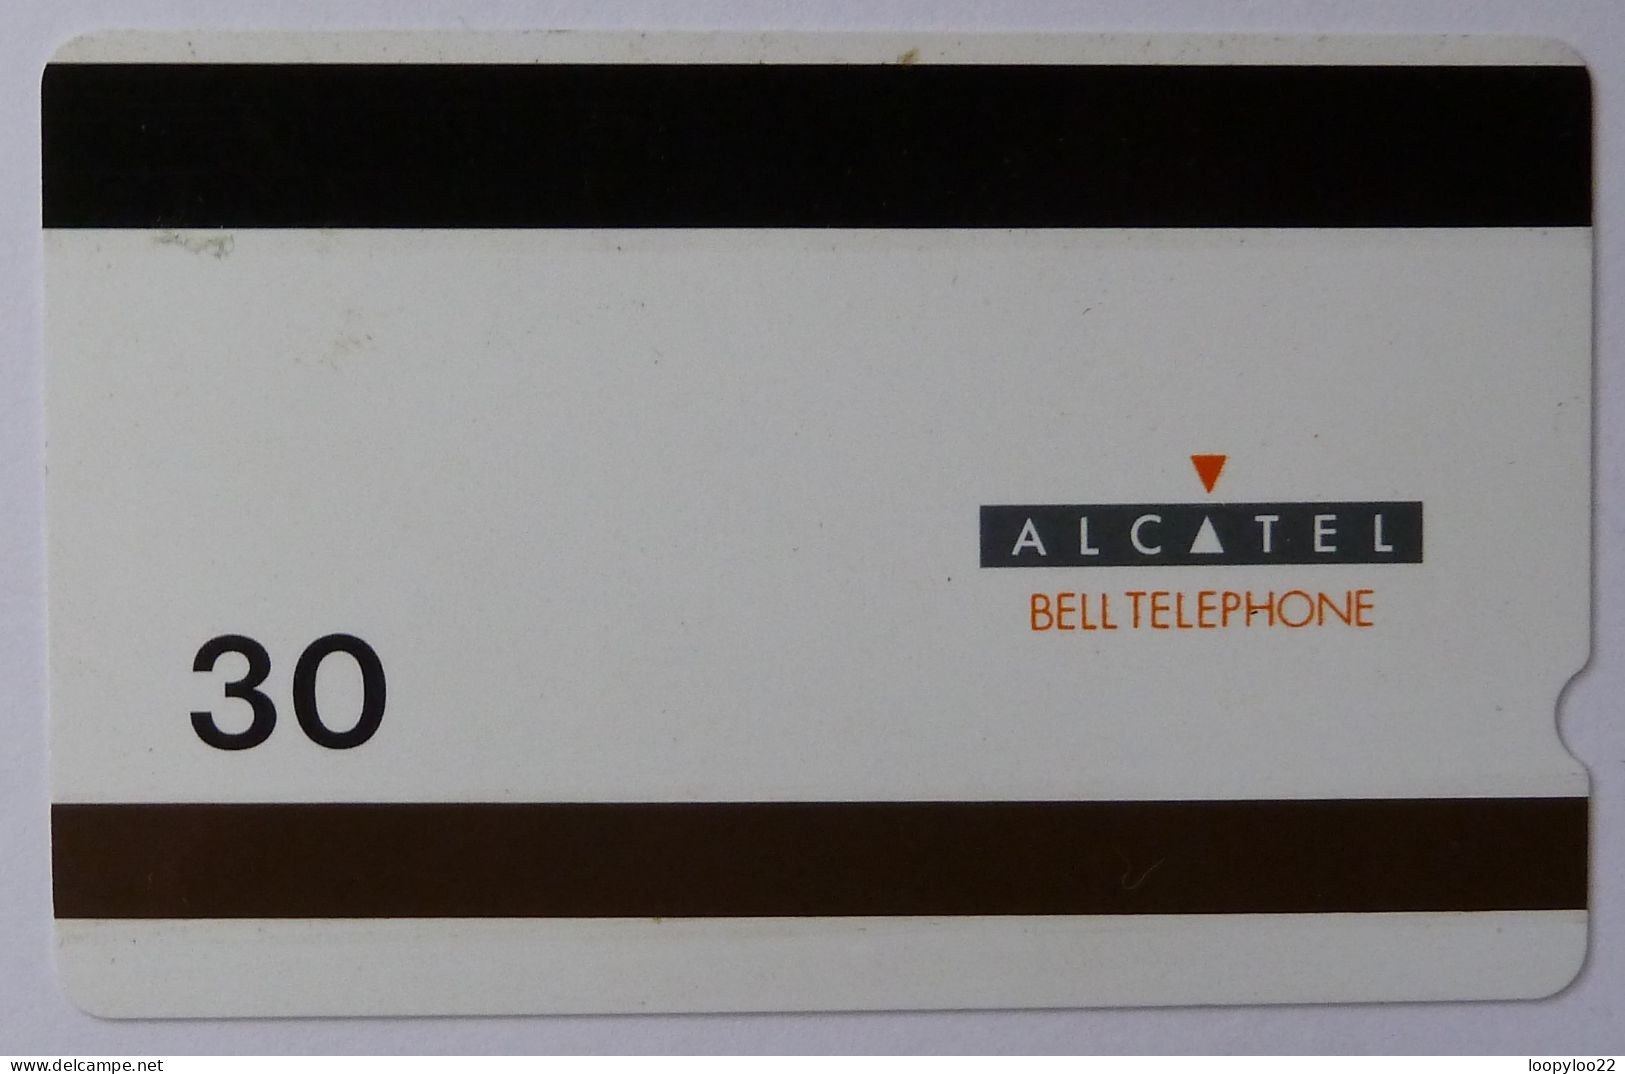 BELGIUM - Alcatel - Bruges Coach - Magnetic - Field Trial / Test - 30 - Bell Telephone - Service & Tests